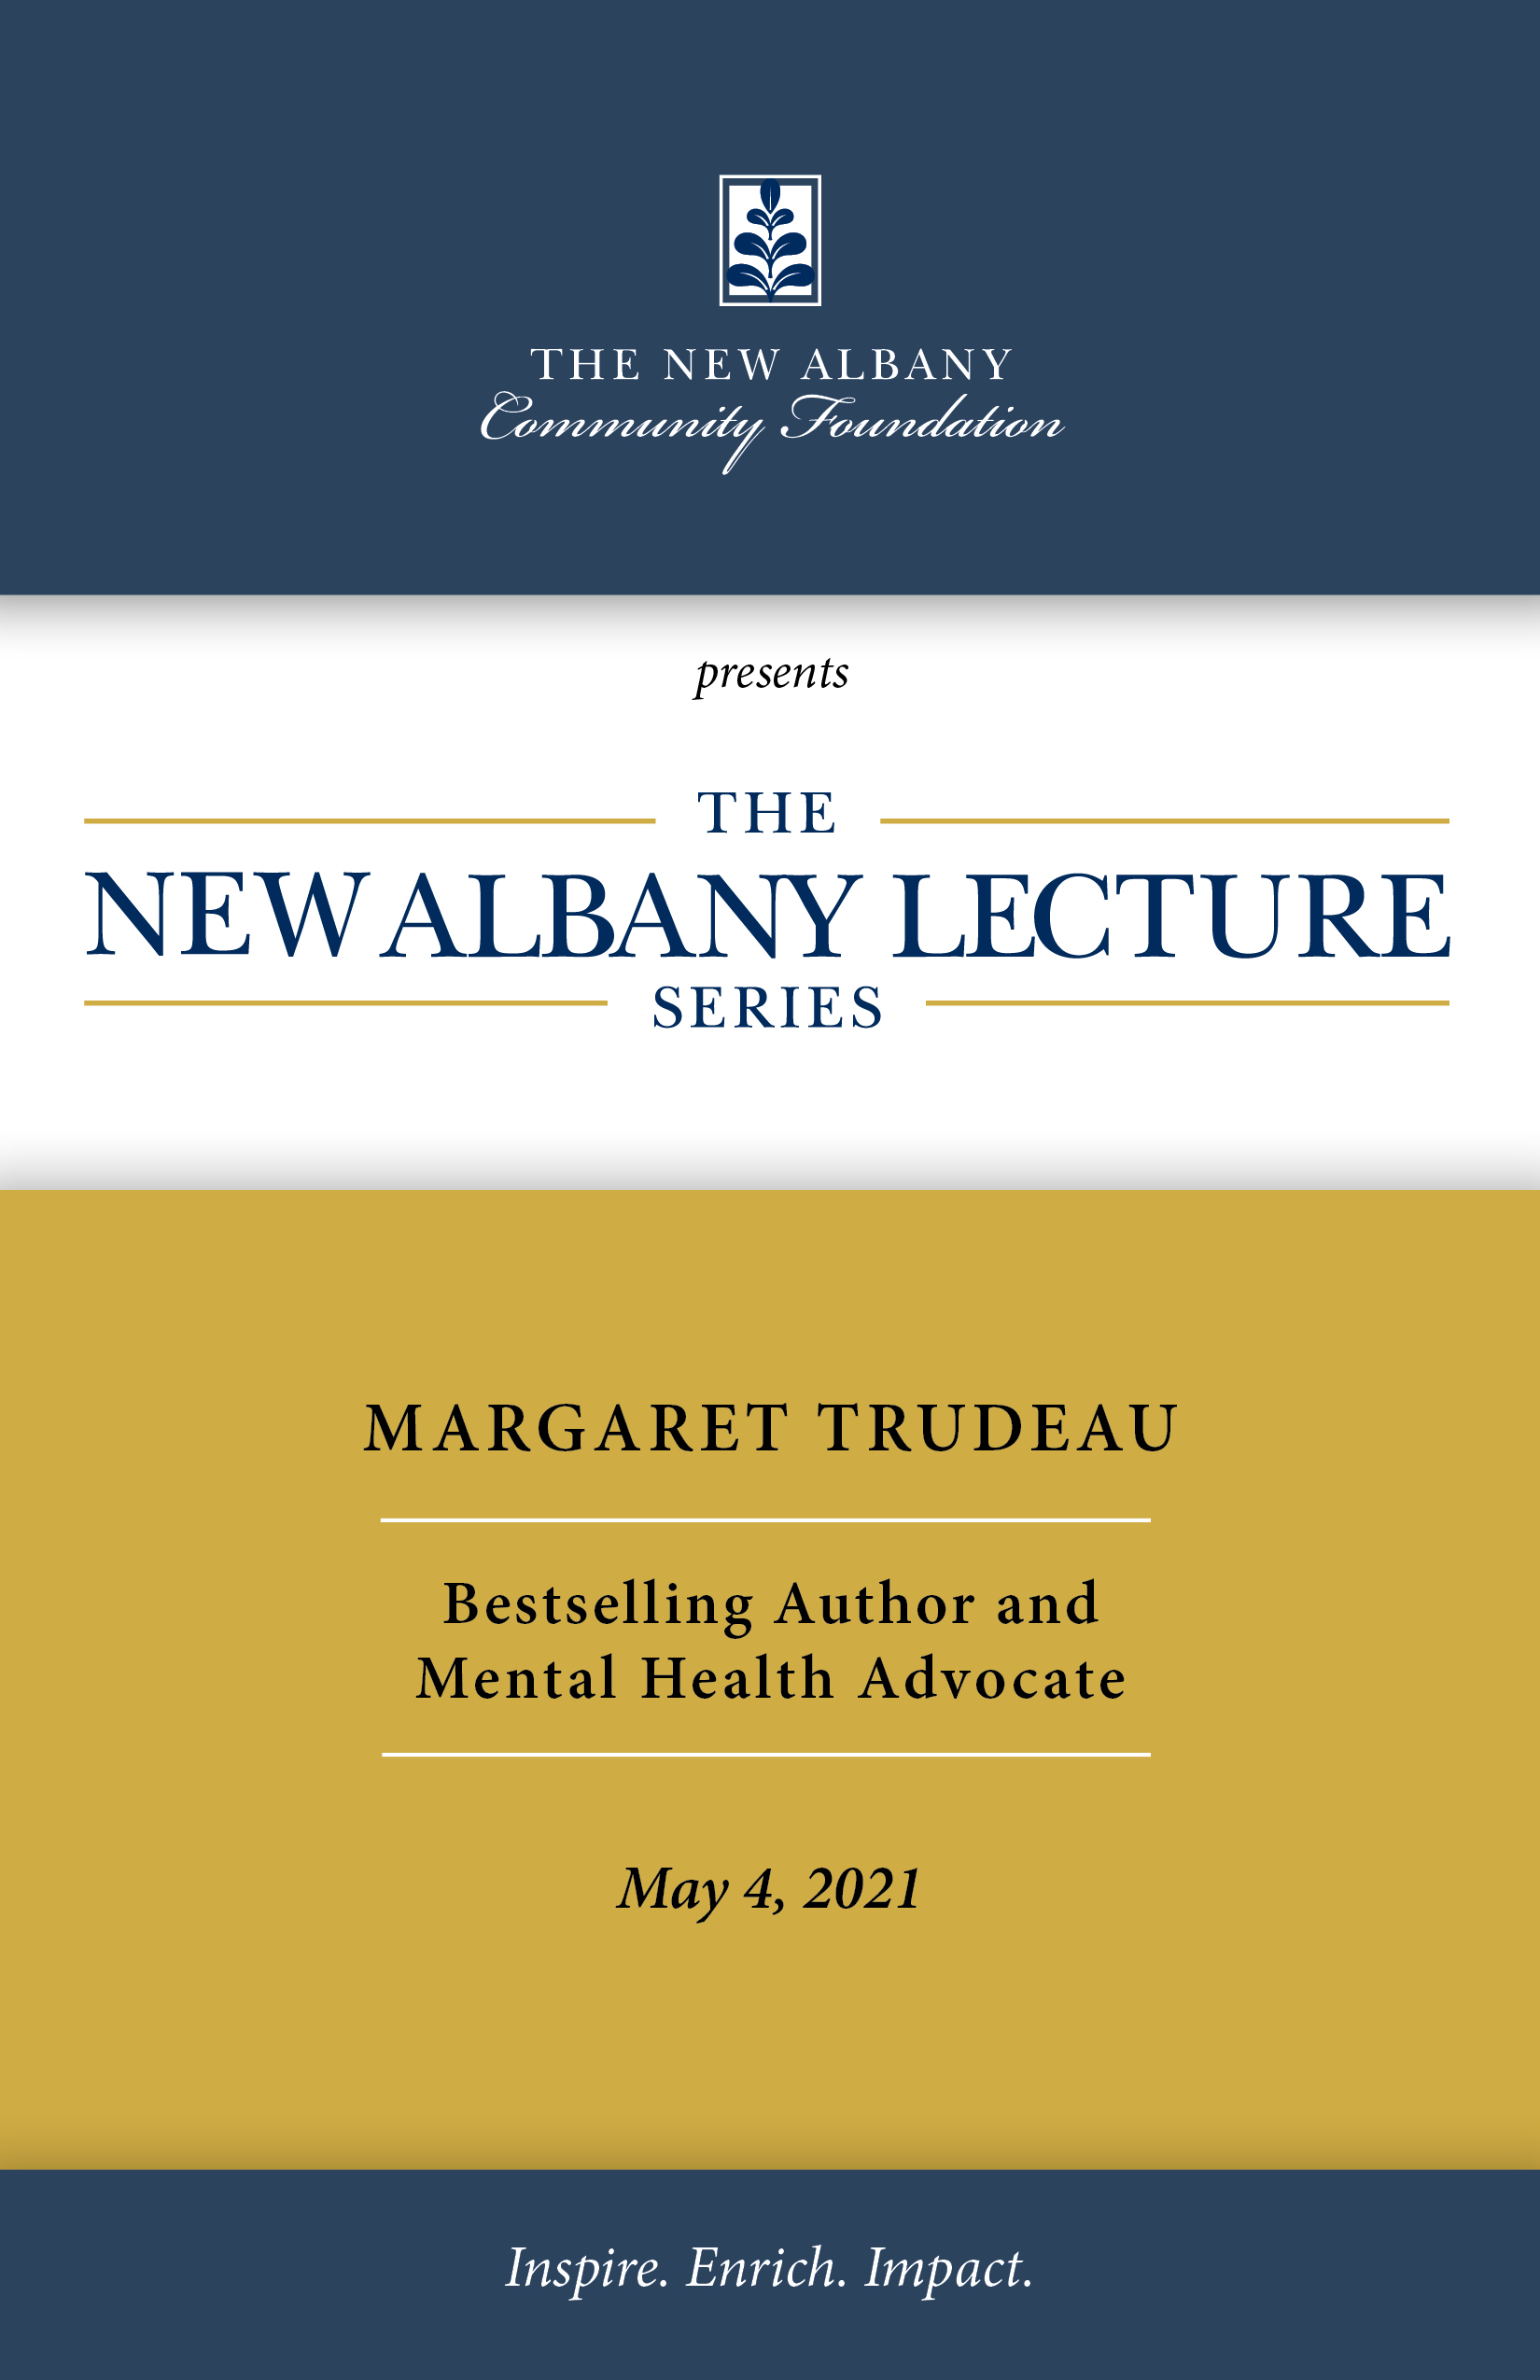 Cover of the PDF for the May 4th event with Margaret Trudeau. Links to a copy of the PDF.